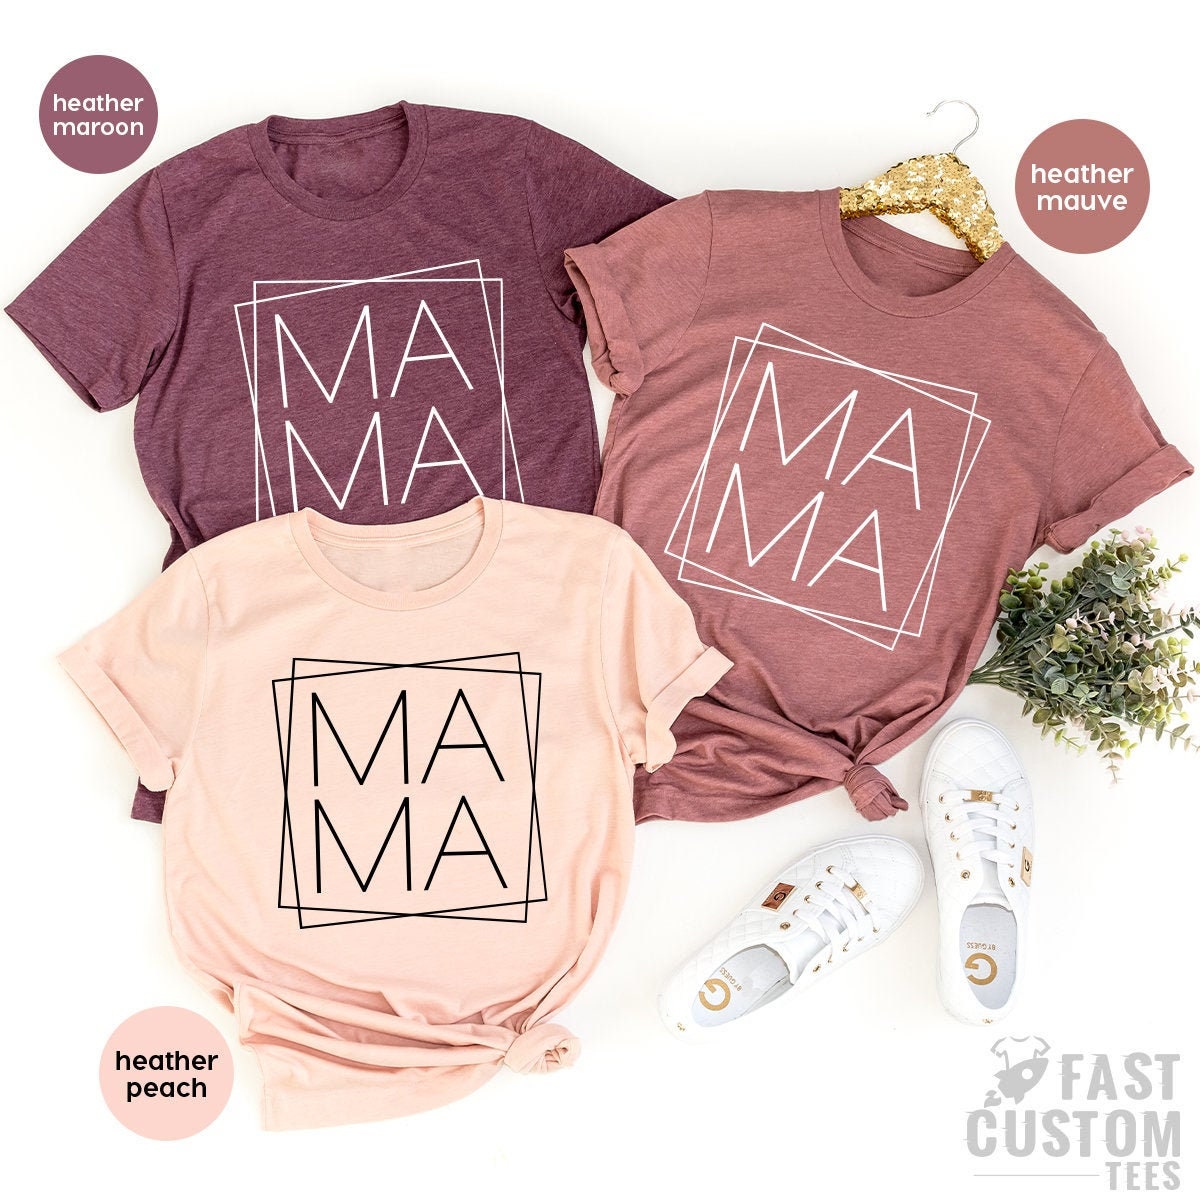 Mama T-Shirt, Mothers Day Shirt, Cute Mommy T Shirt, New Mom Shirt, Cool Womens Shirt, Pregnancy Gift, Mom To Be Shirt, Gift For Her - Fastdeliverytees.com